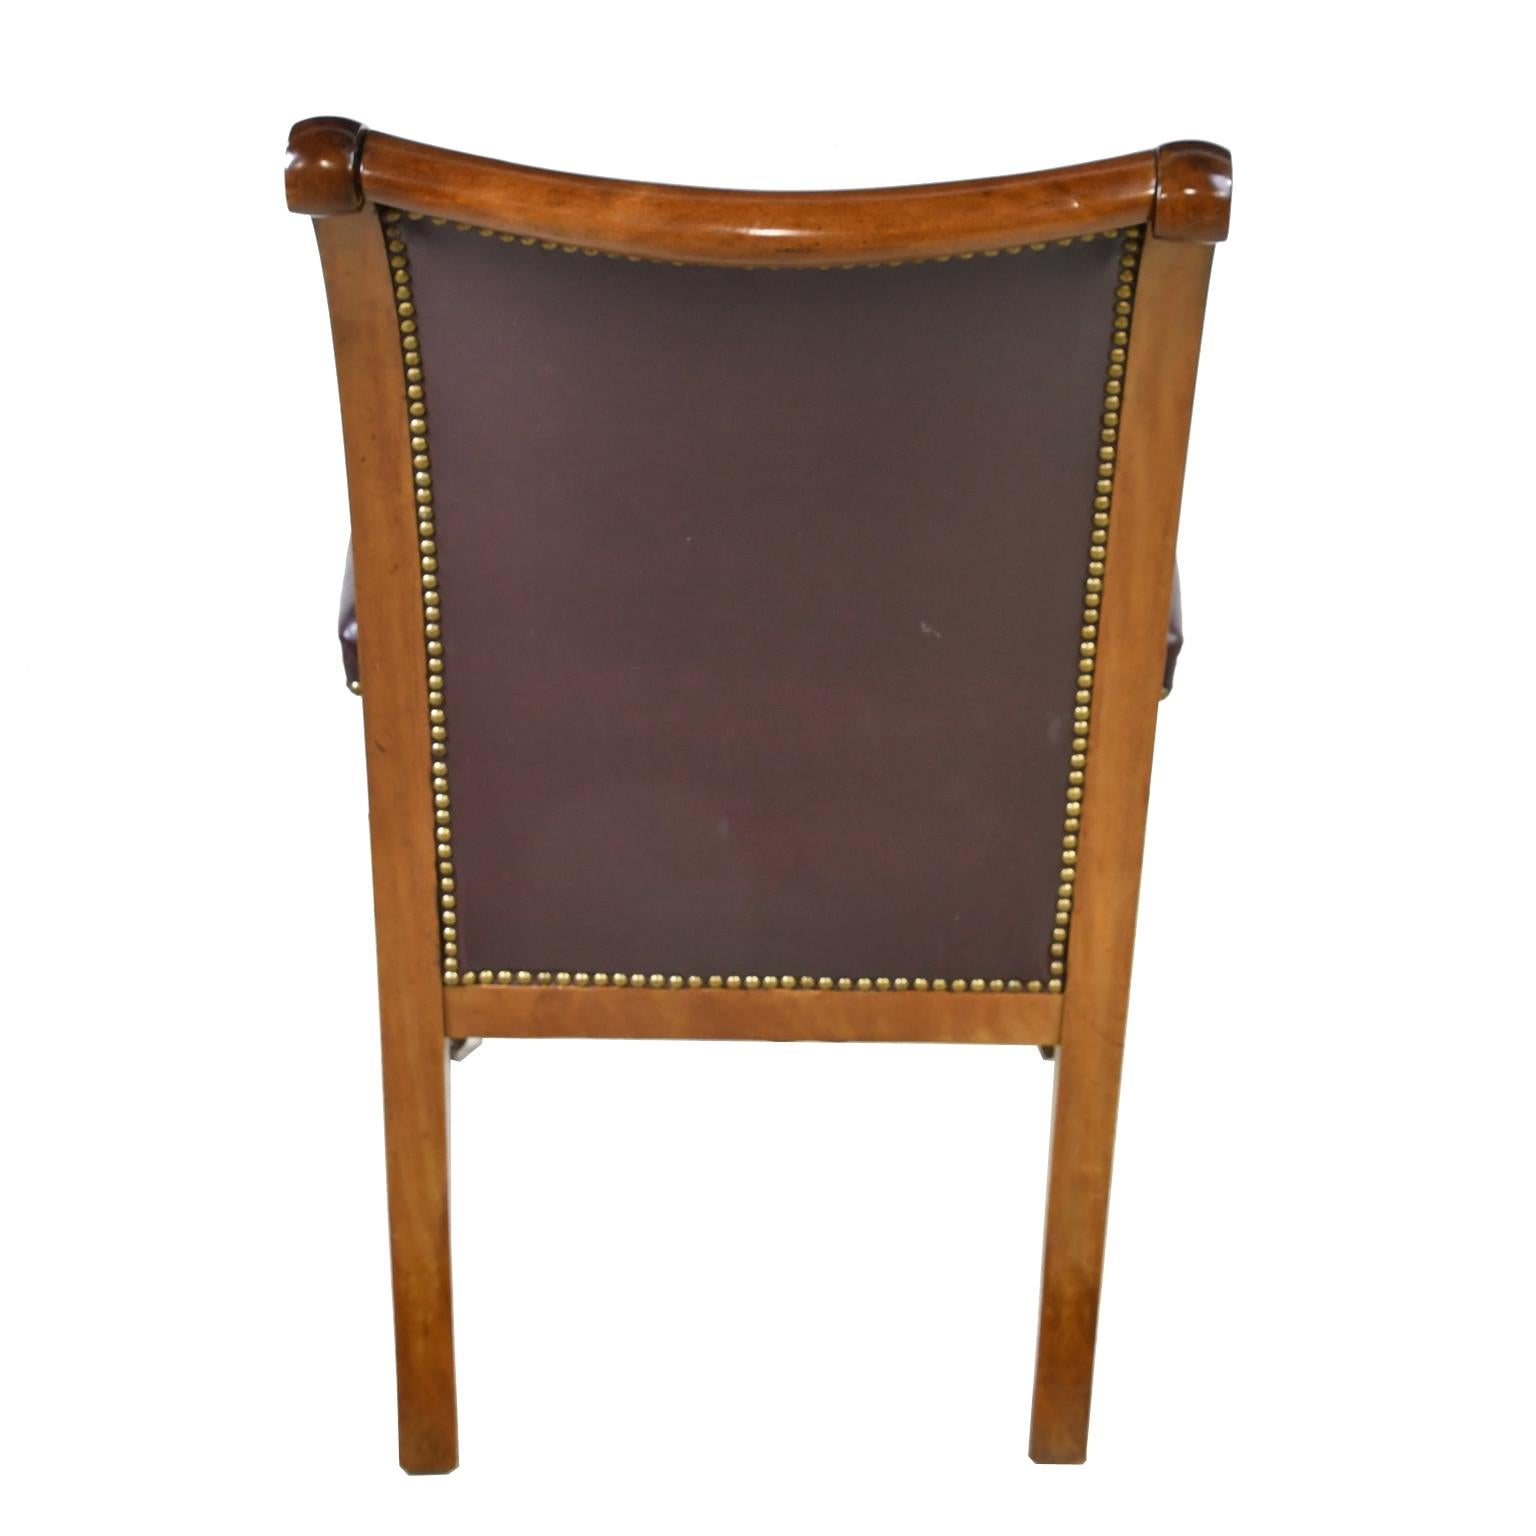 19th Century French Charles X Desk Chair with Mahogany Frame and Tufted Leather, circa 1820